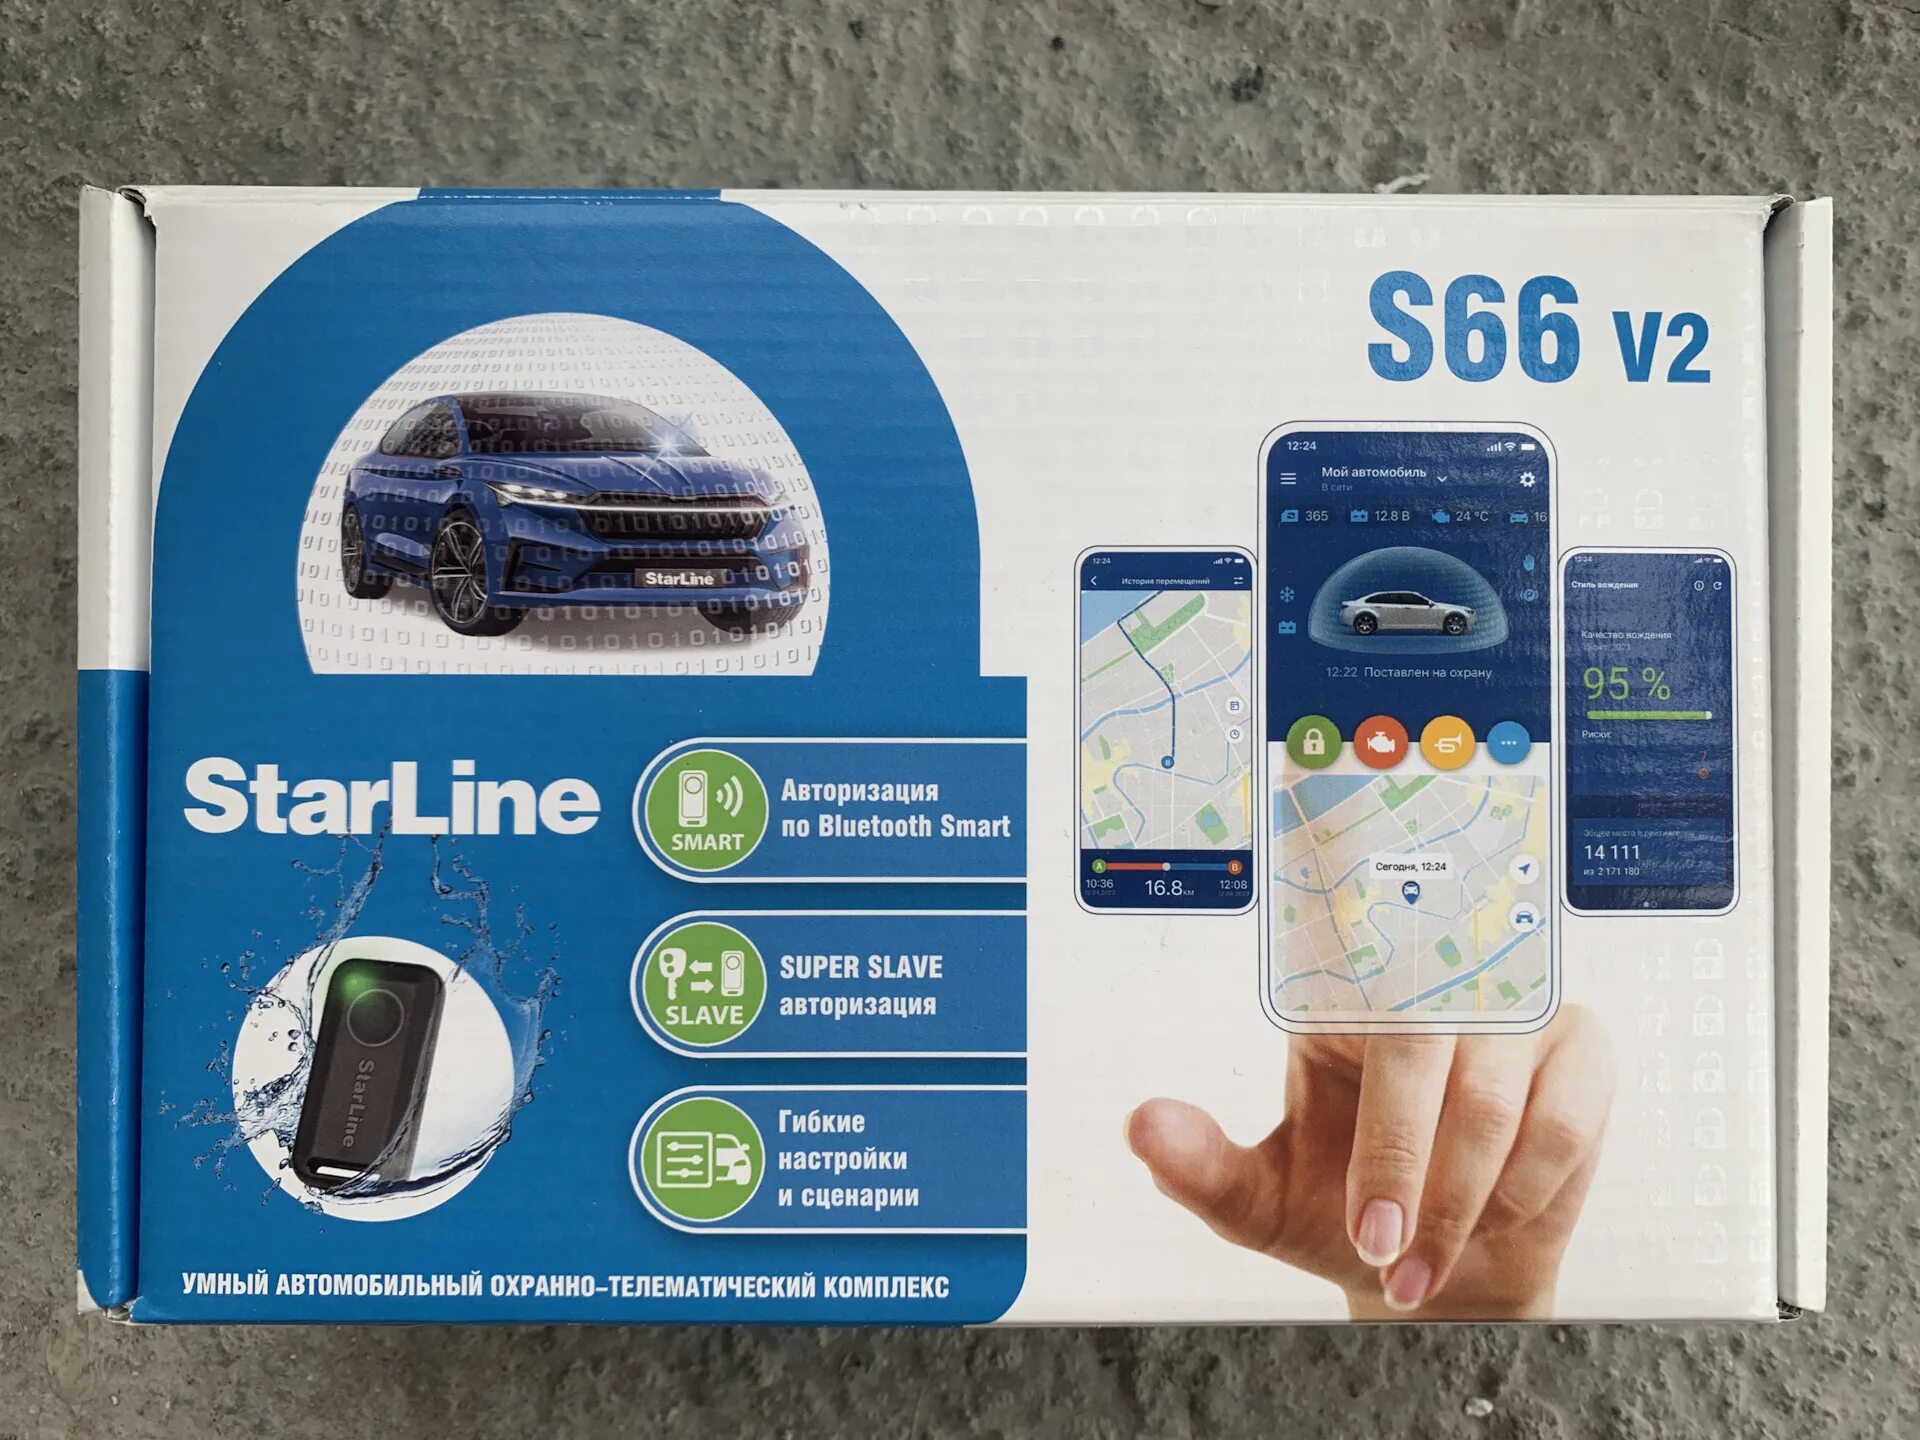 Starline s96 bt gsm 2can 4lin. Старлайн s66 BT GSM. STARLINE s96 BT GSM комплектация. STARLINE s66 v2. STARLINE s66 GSM v2.